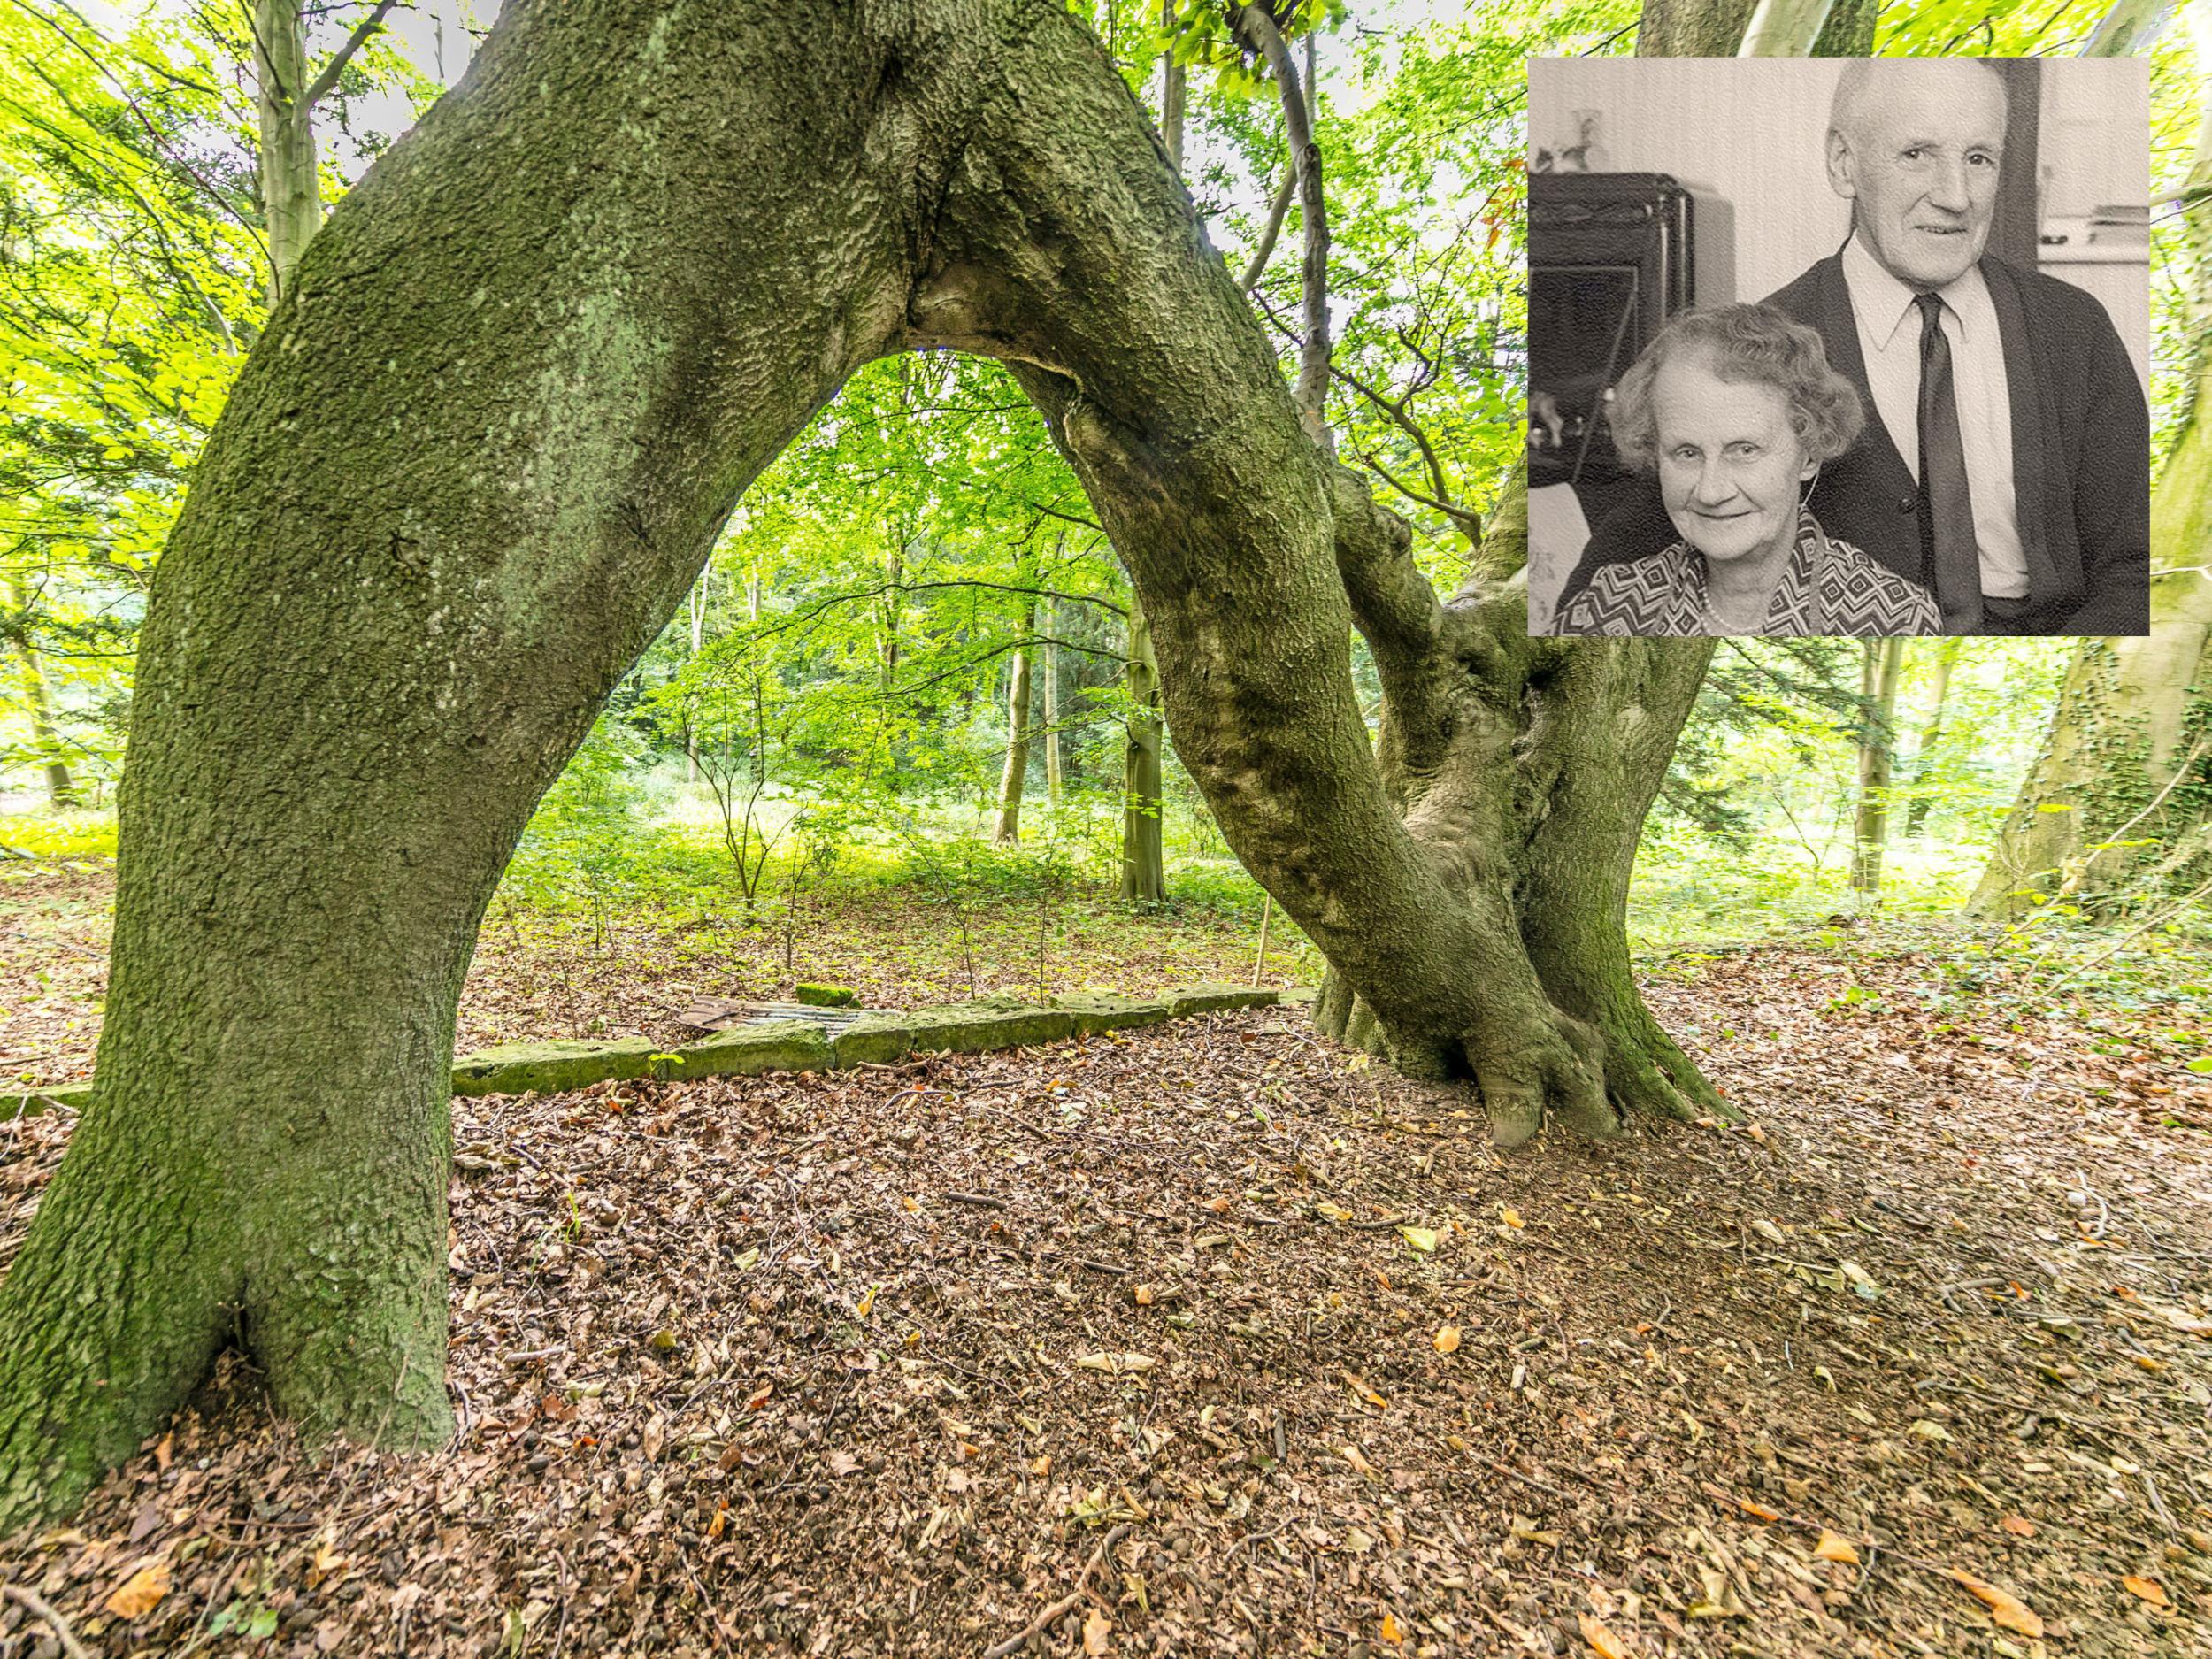 Nellie’s tree is competing in the European Tree of the Year competition